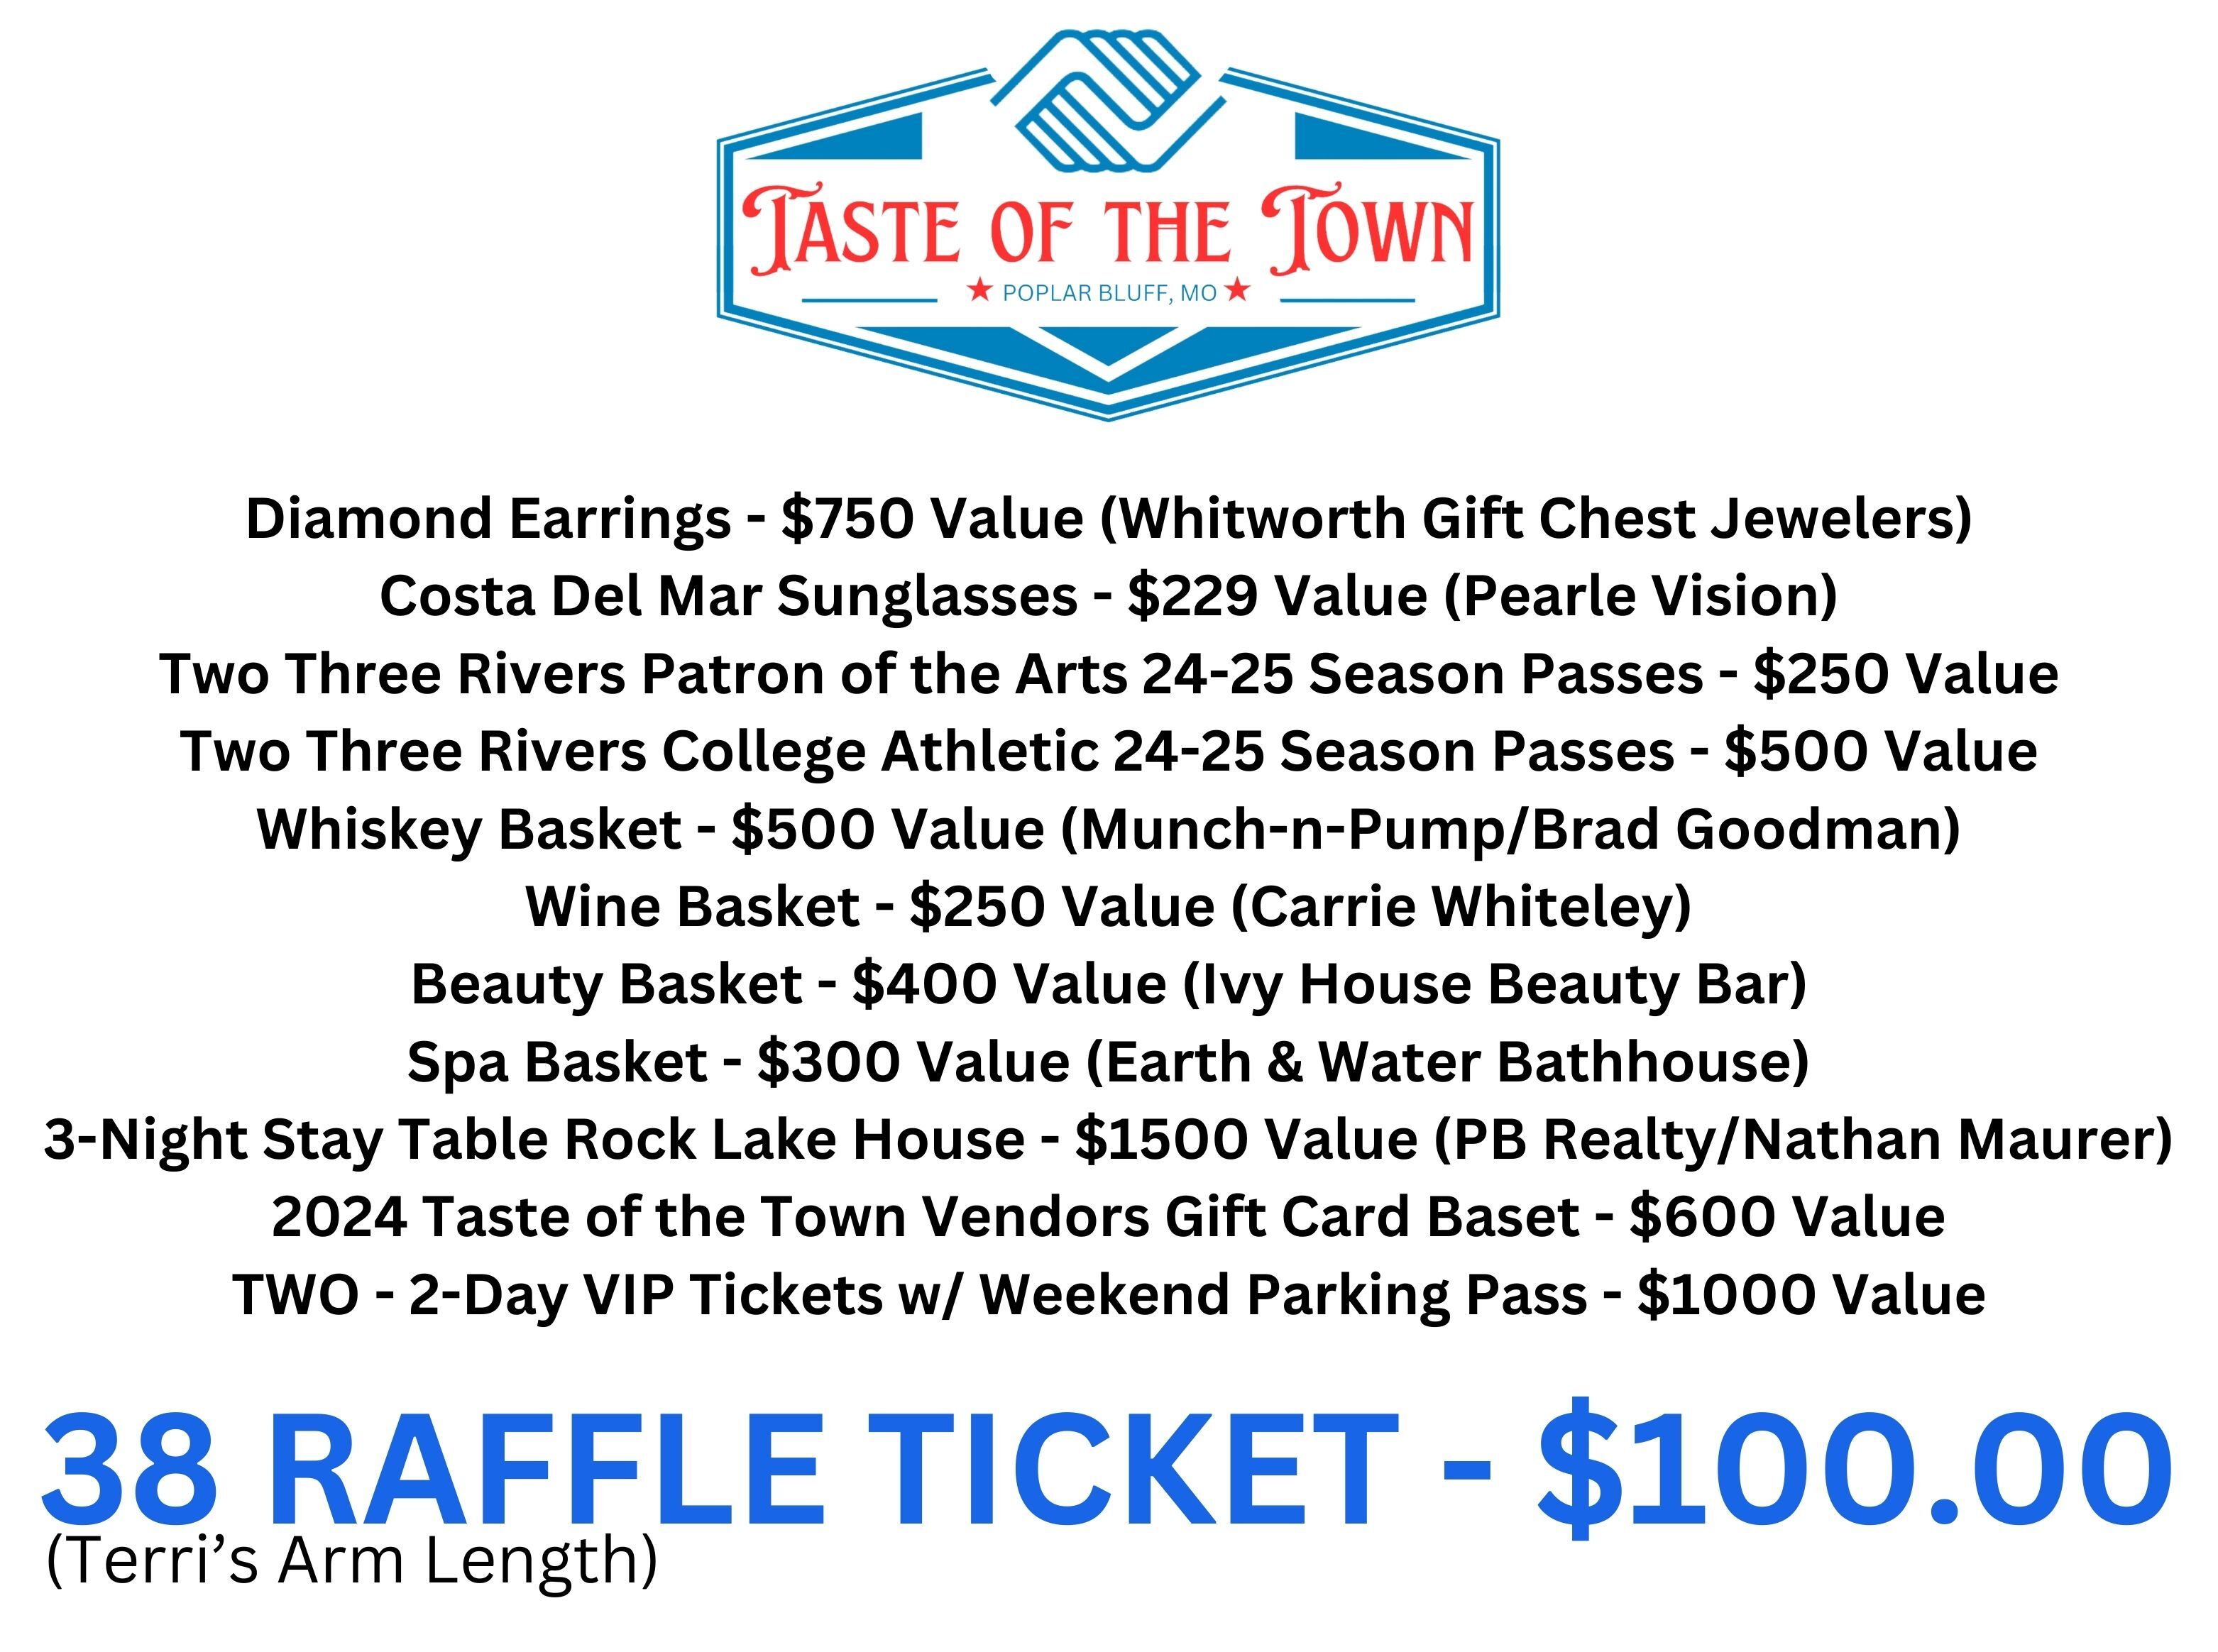 PURCHASE 38 RAFFLE TICKETS HERE